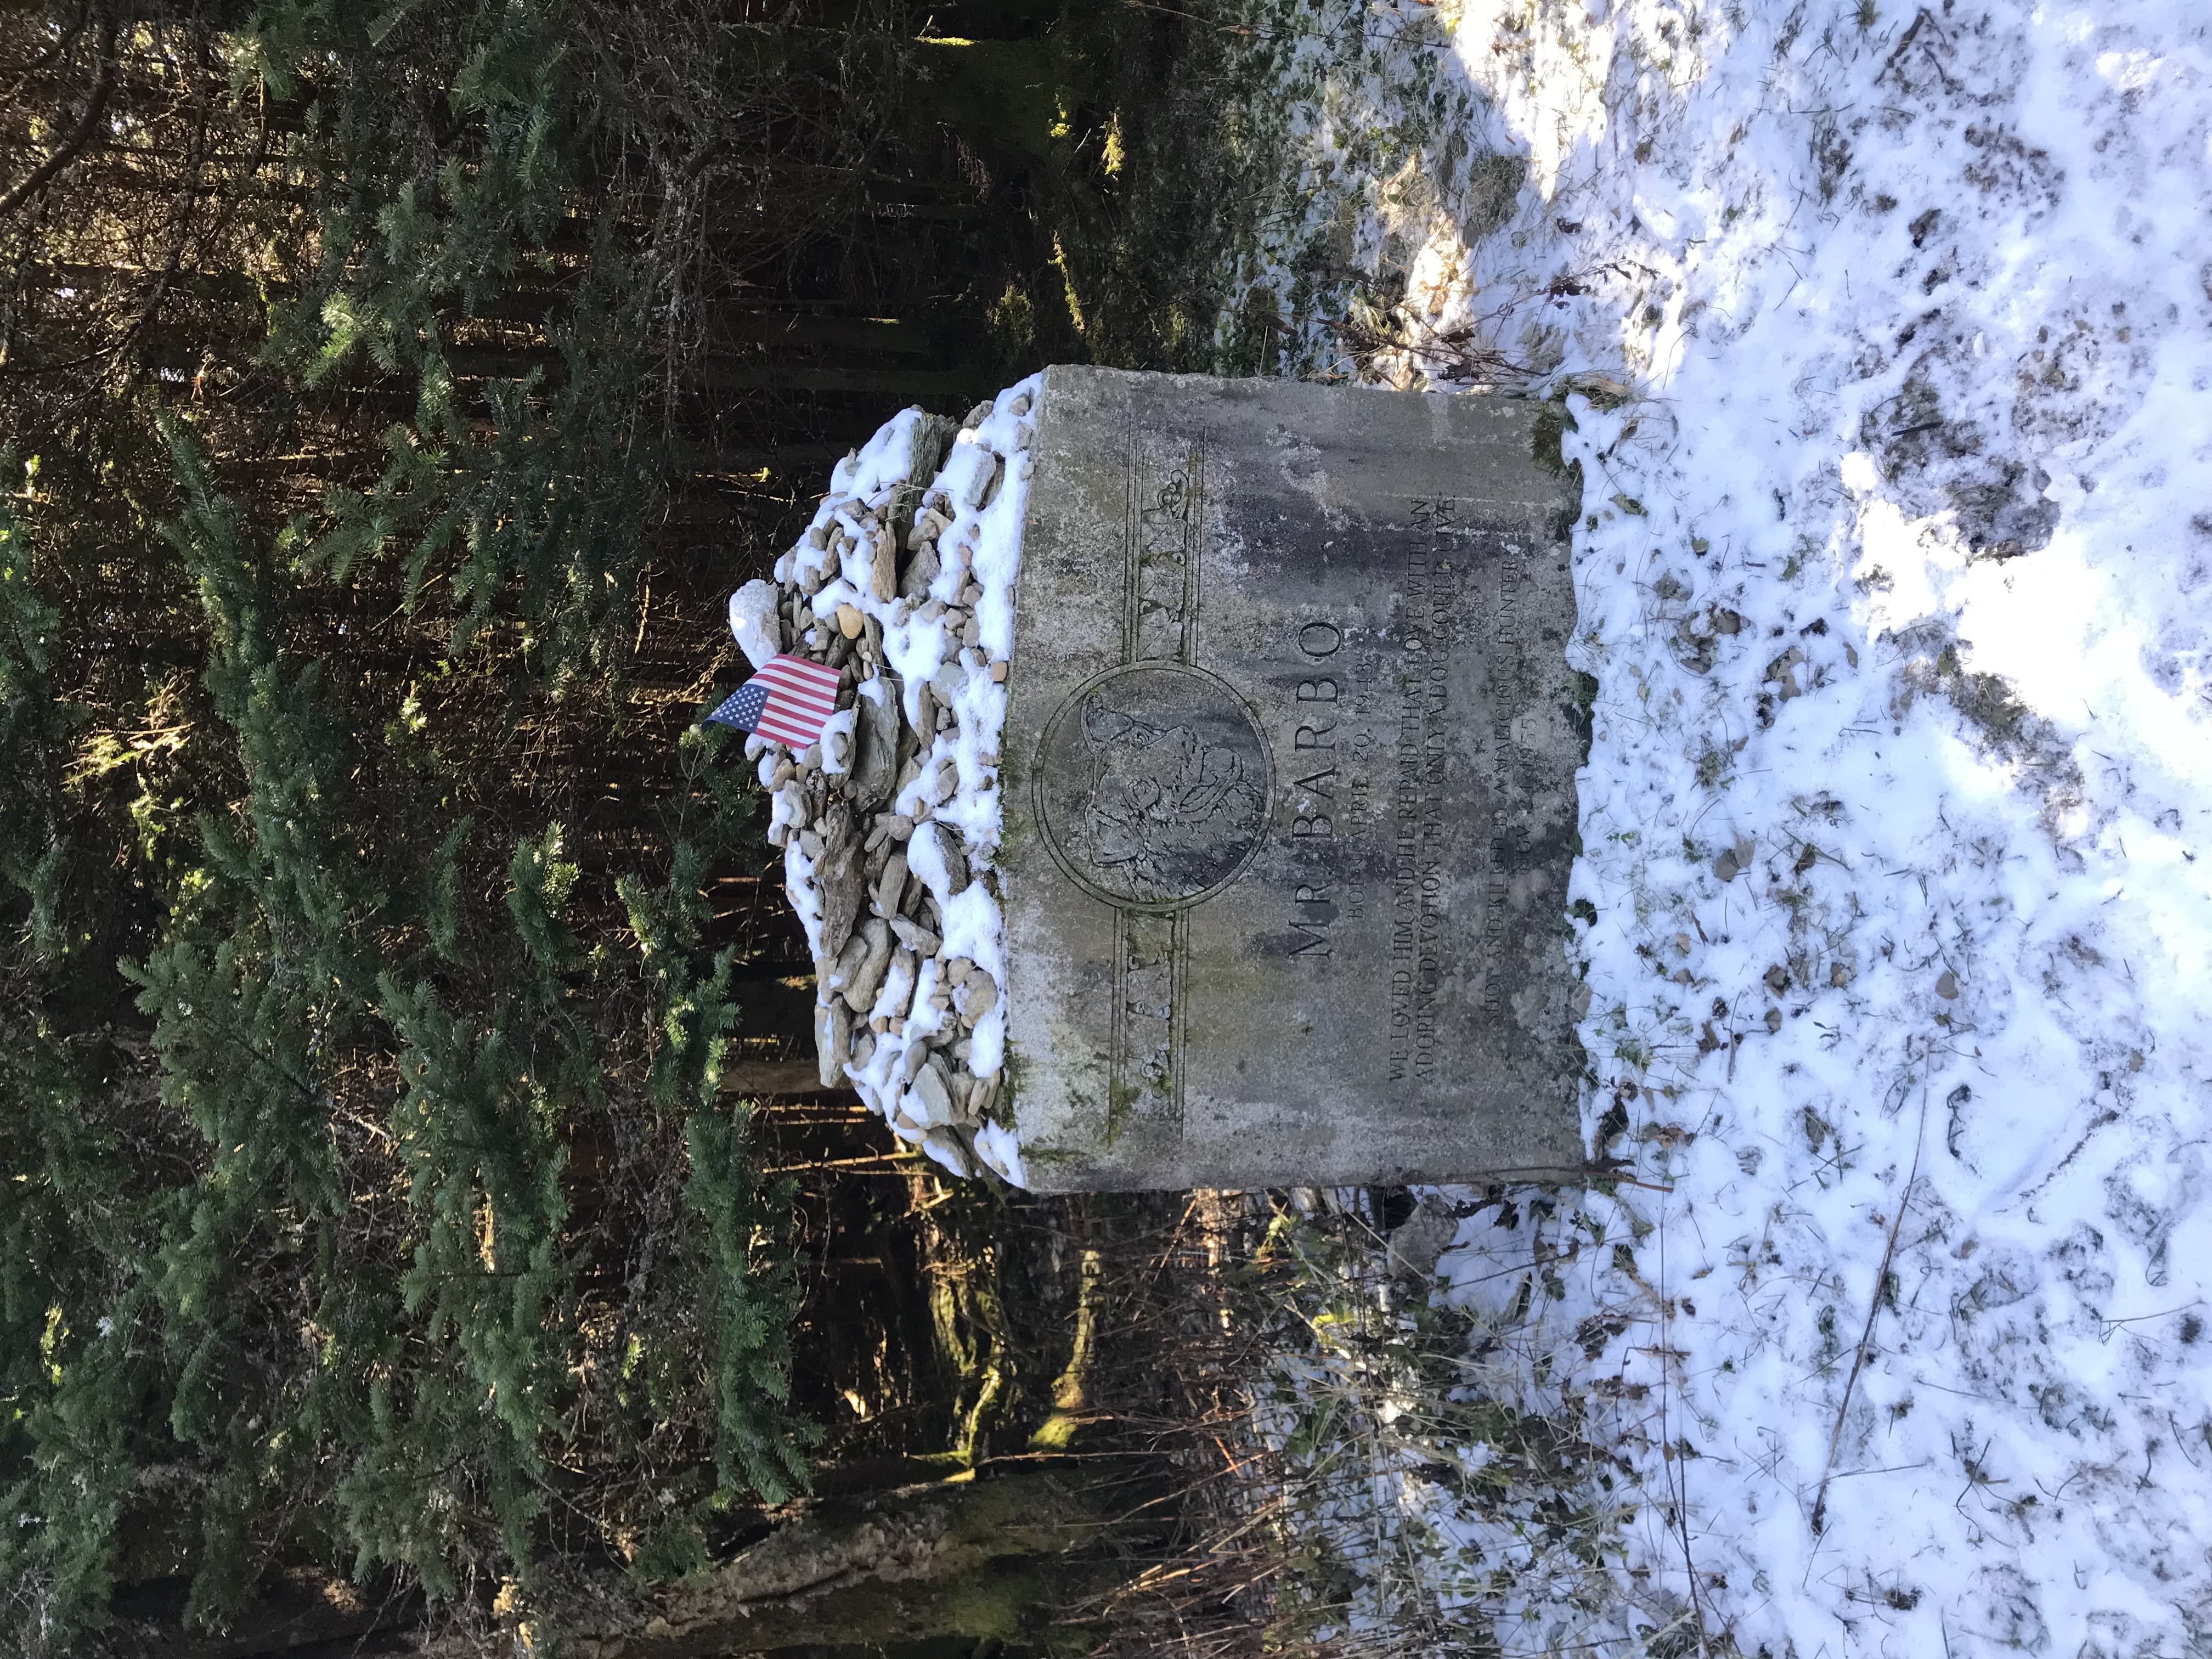 Mr. Barbo's Grave near the summit